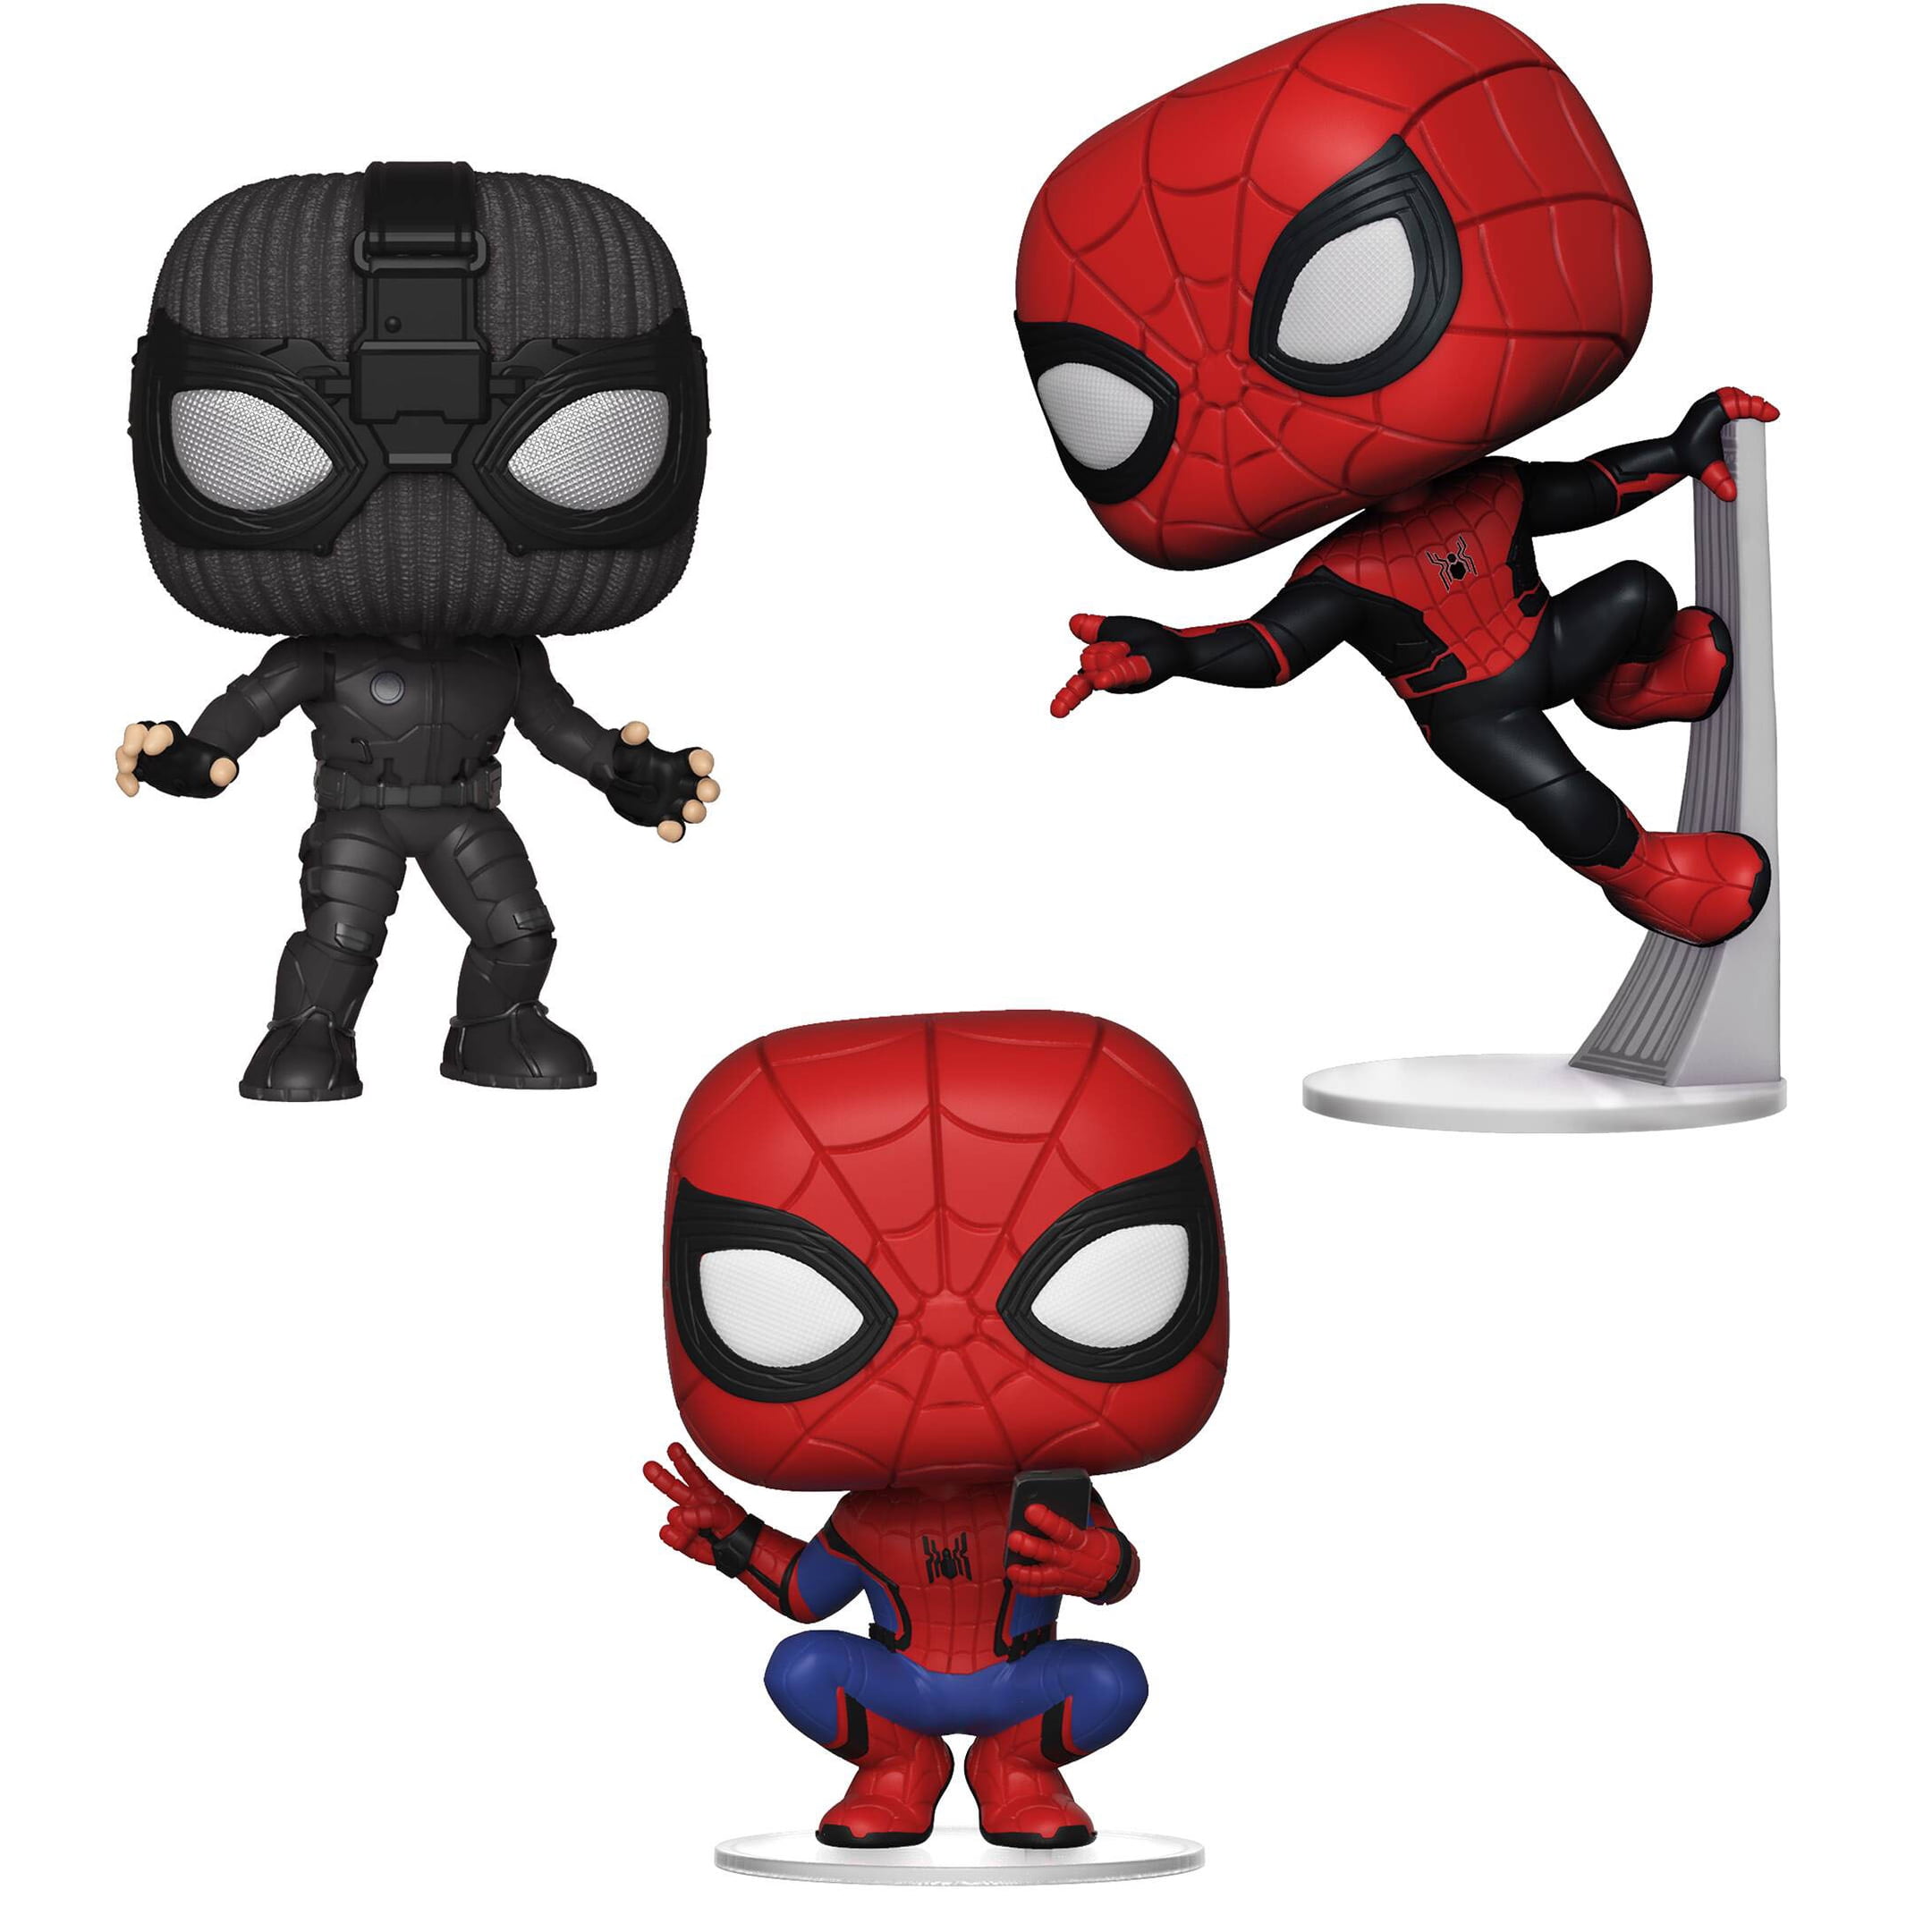 Funko POP! Marvel Spider-Man Far From Home Collectors Set - Spider Man  Stealth Suit, Spider Man Hero Suit, Spider Man Upgraded Suit 